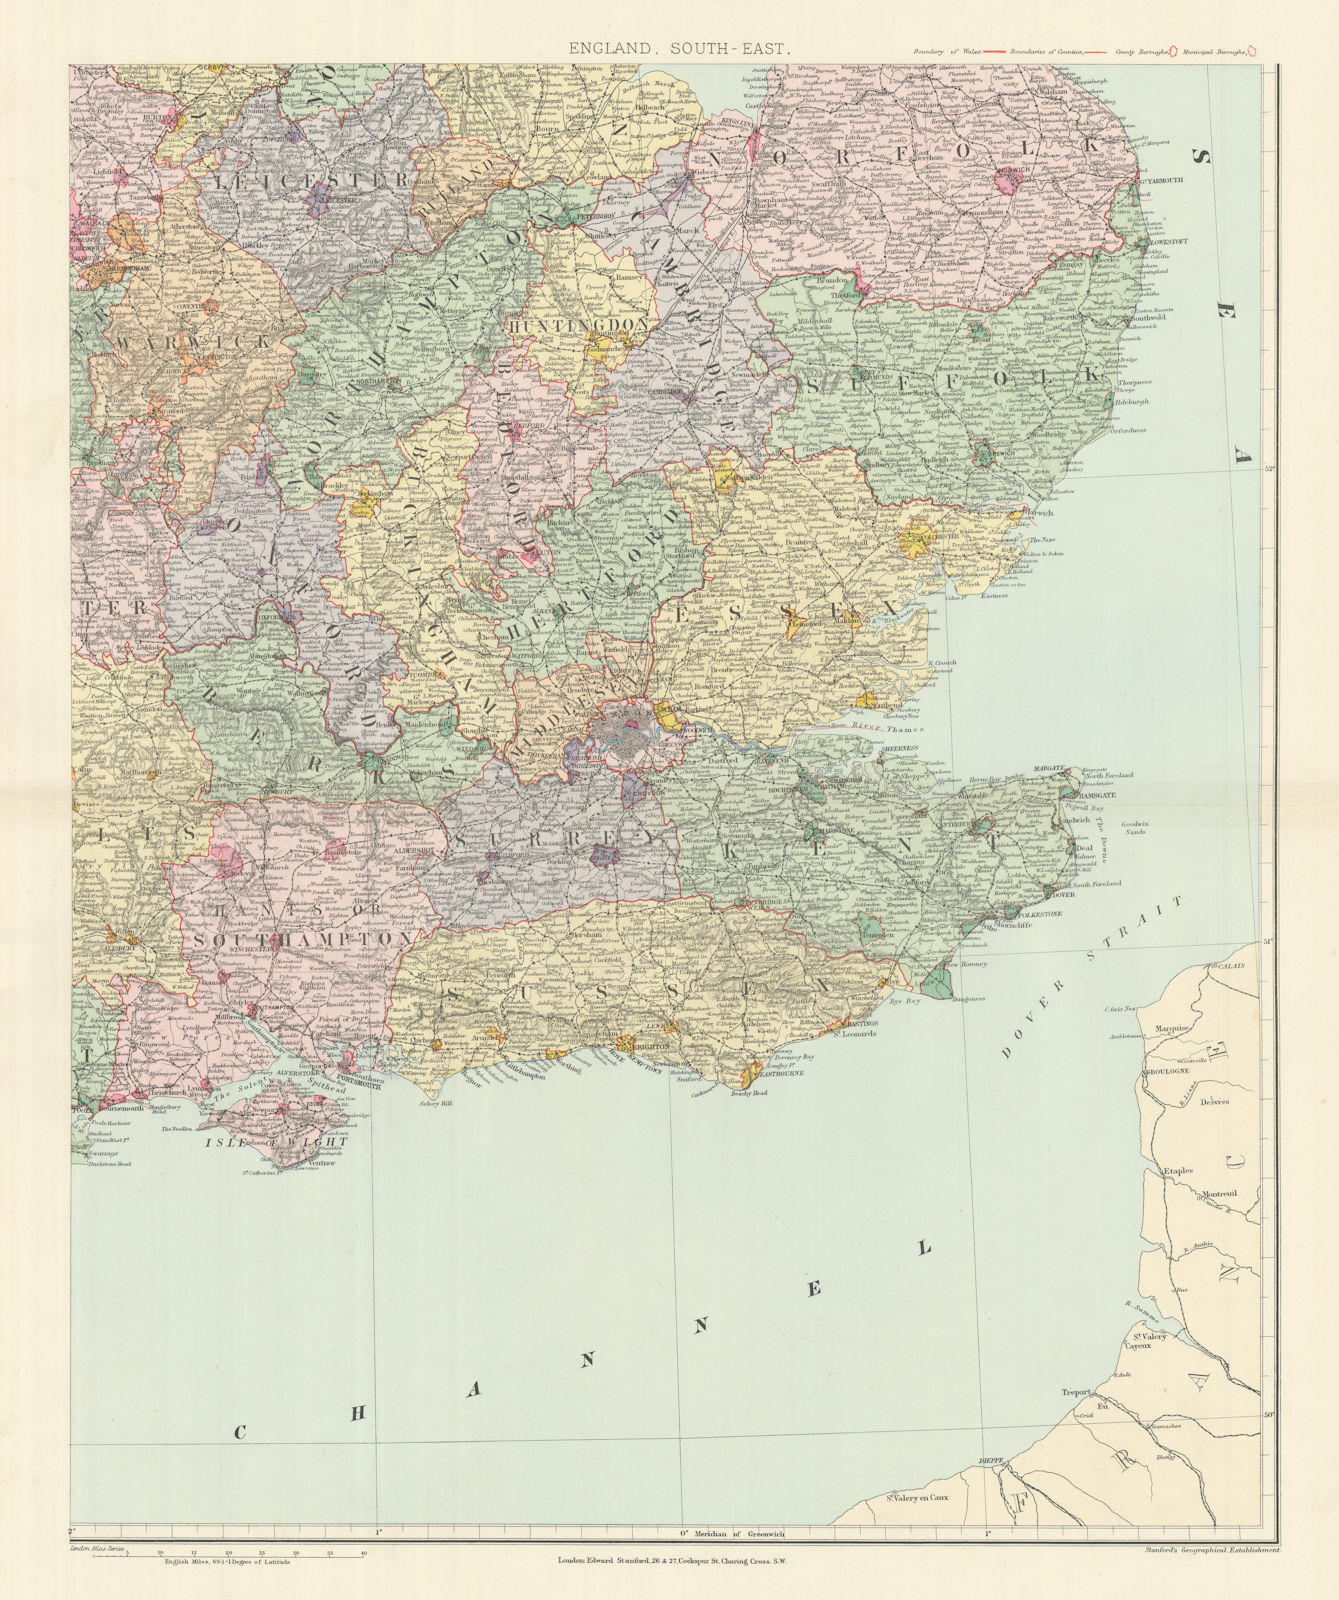 South east England. Counties & boroughs. Large 62x50cm. STANFORD 1894 old map